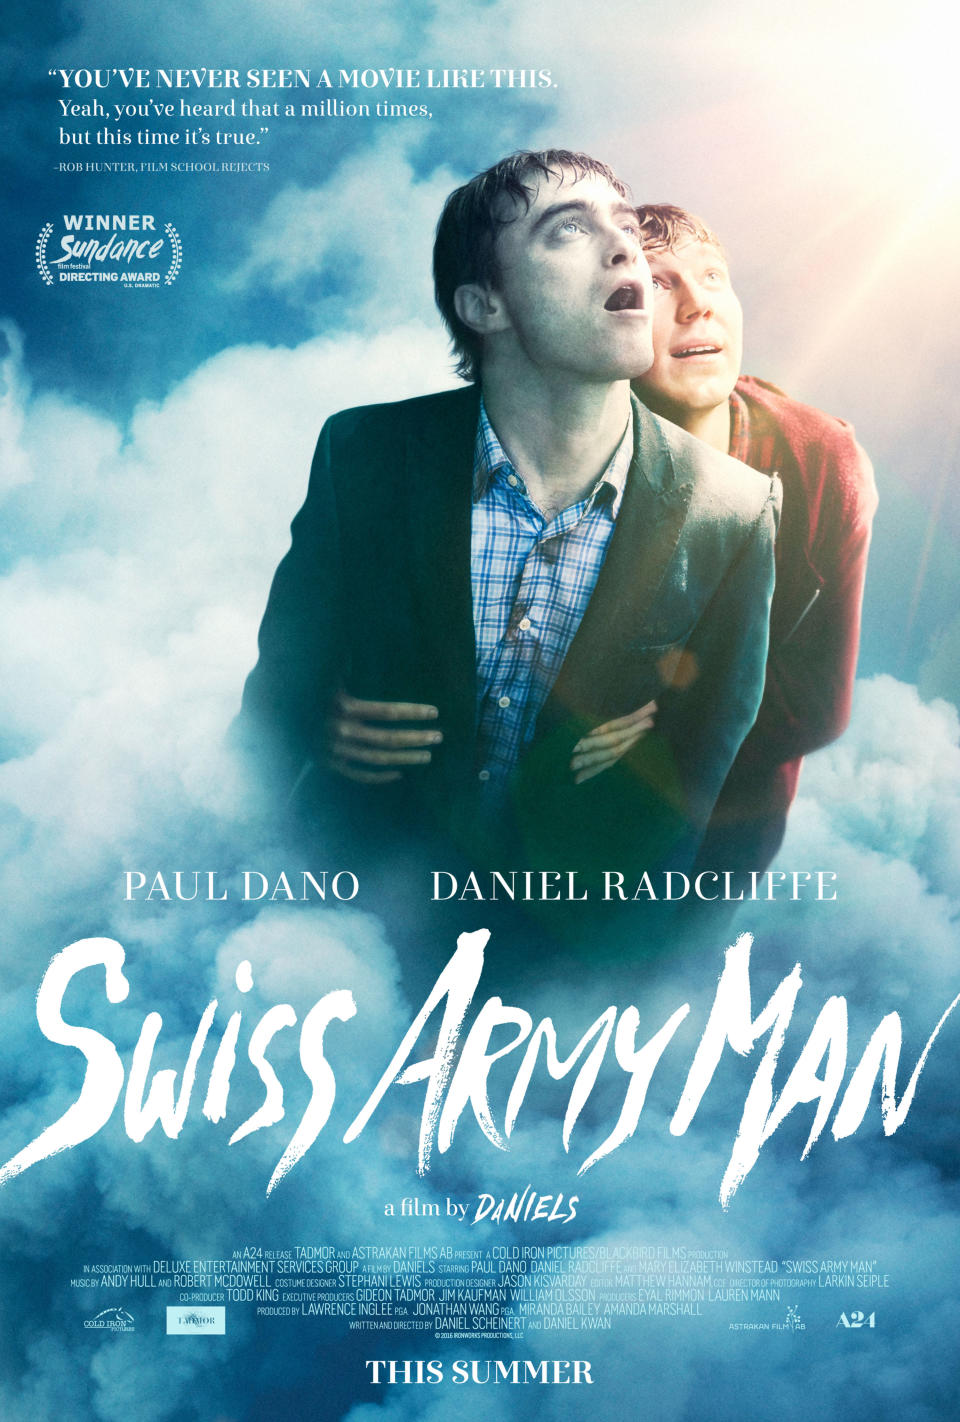 Poster for "Swiss Army Man"